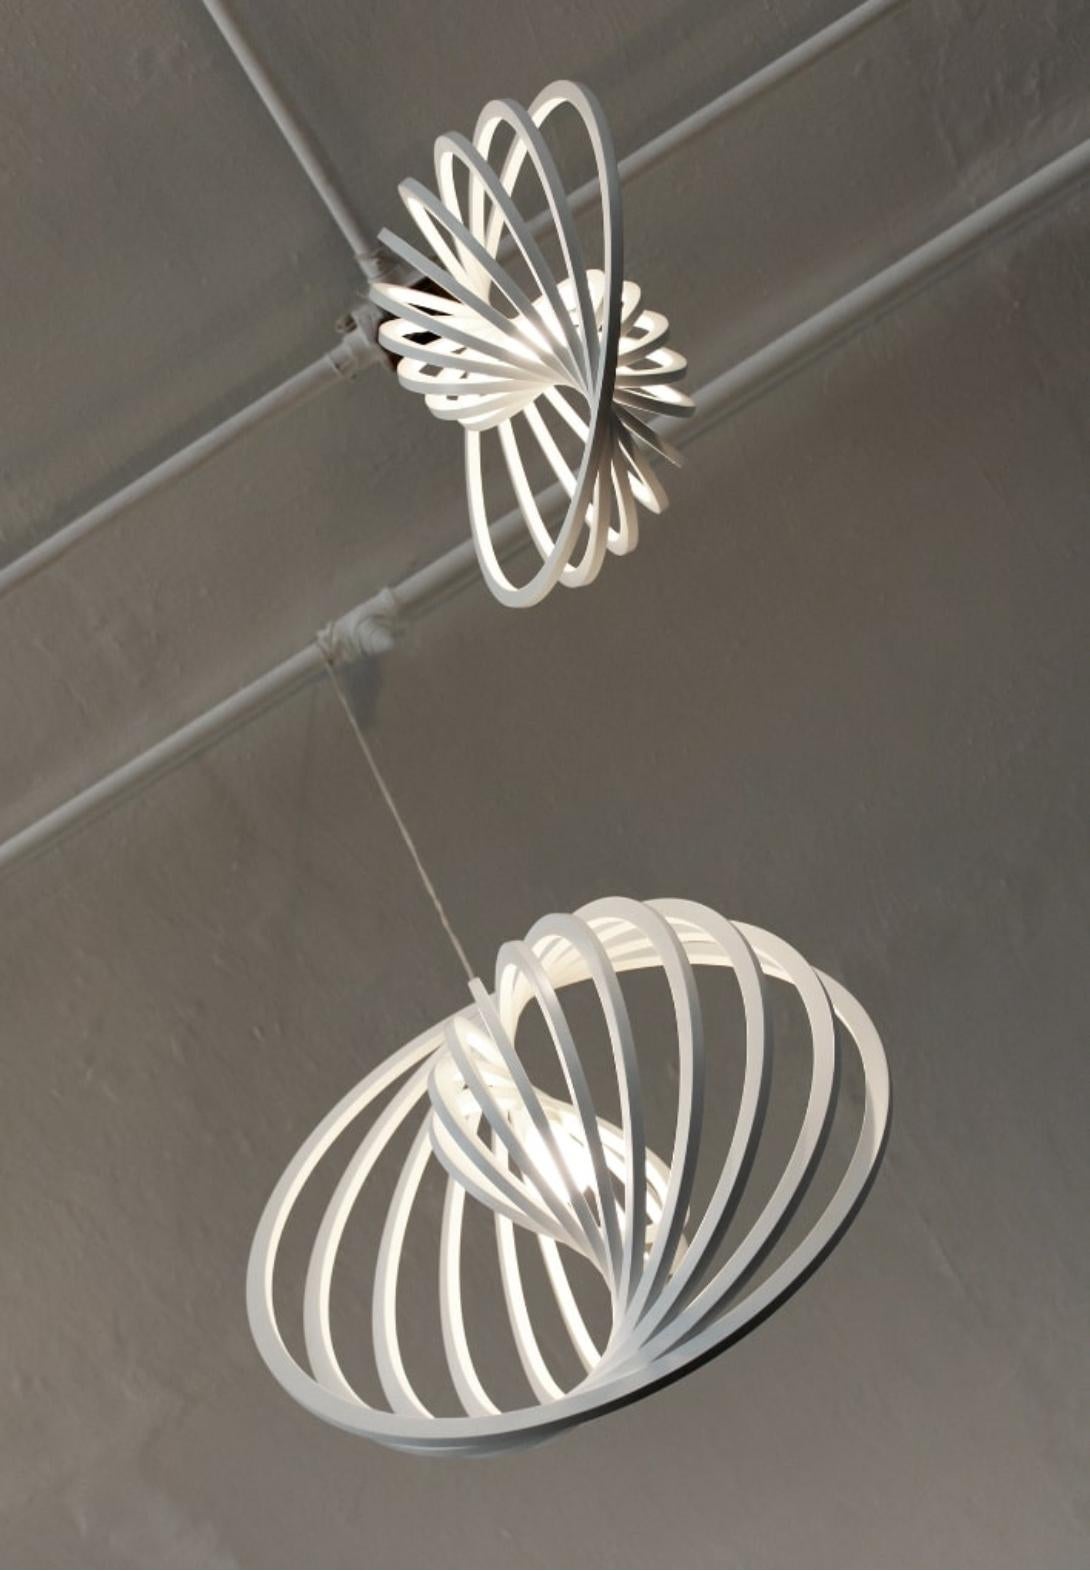 Engiro Ceiling Light, Maria Beckmann, Represented by Tuleste Factory For Sale 3